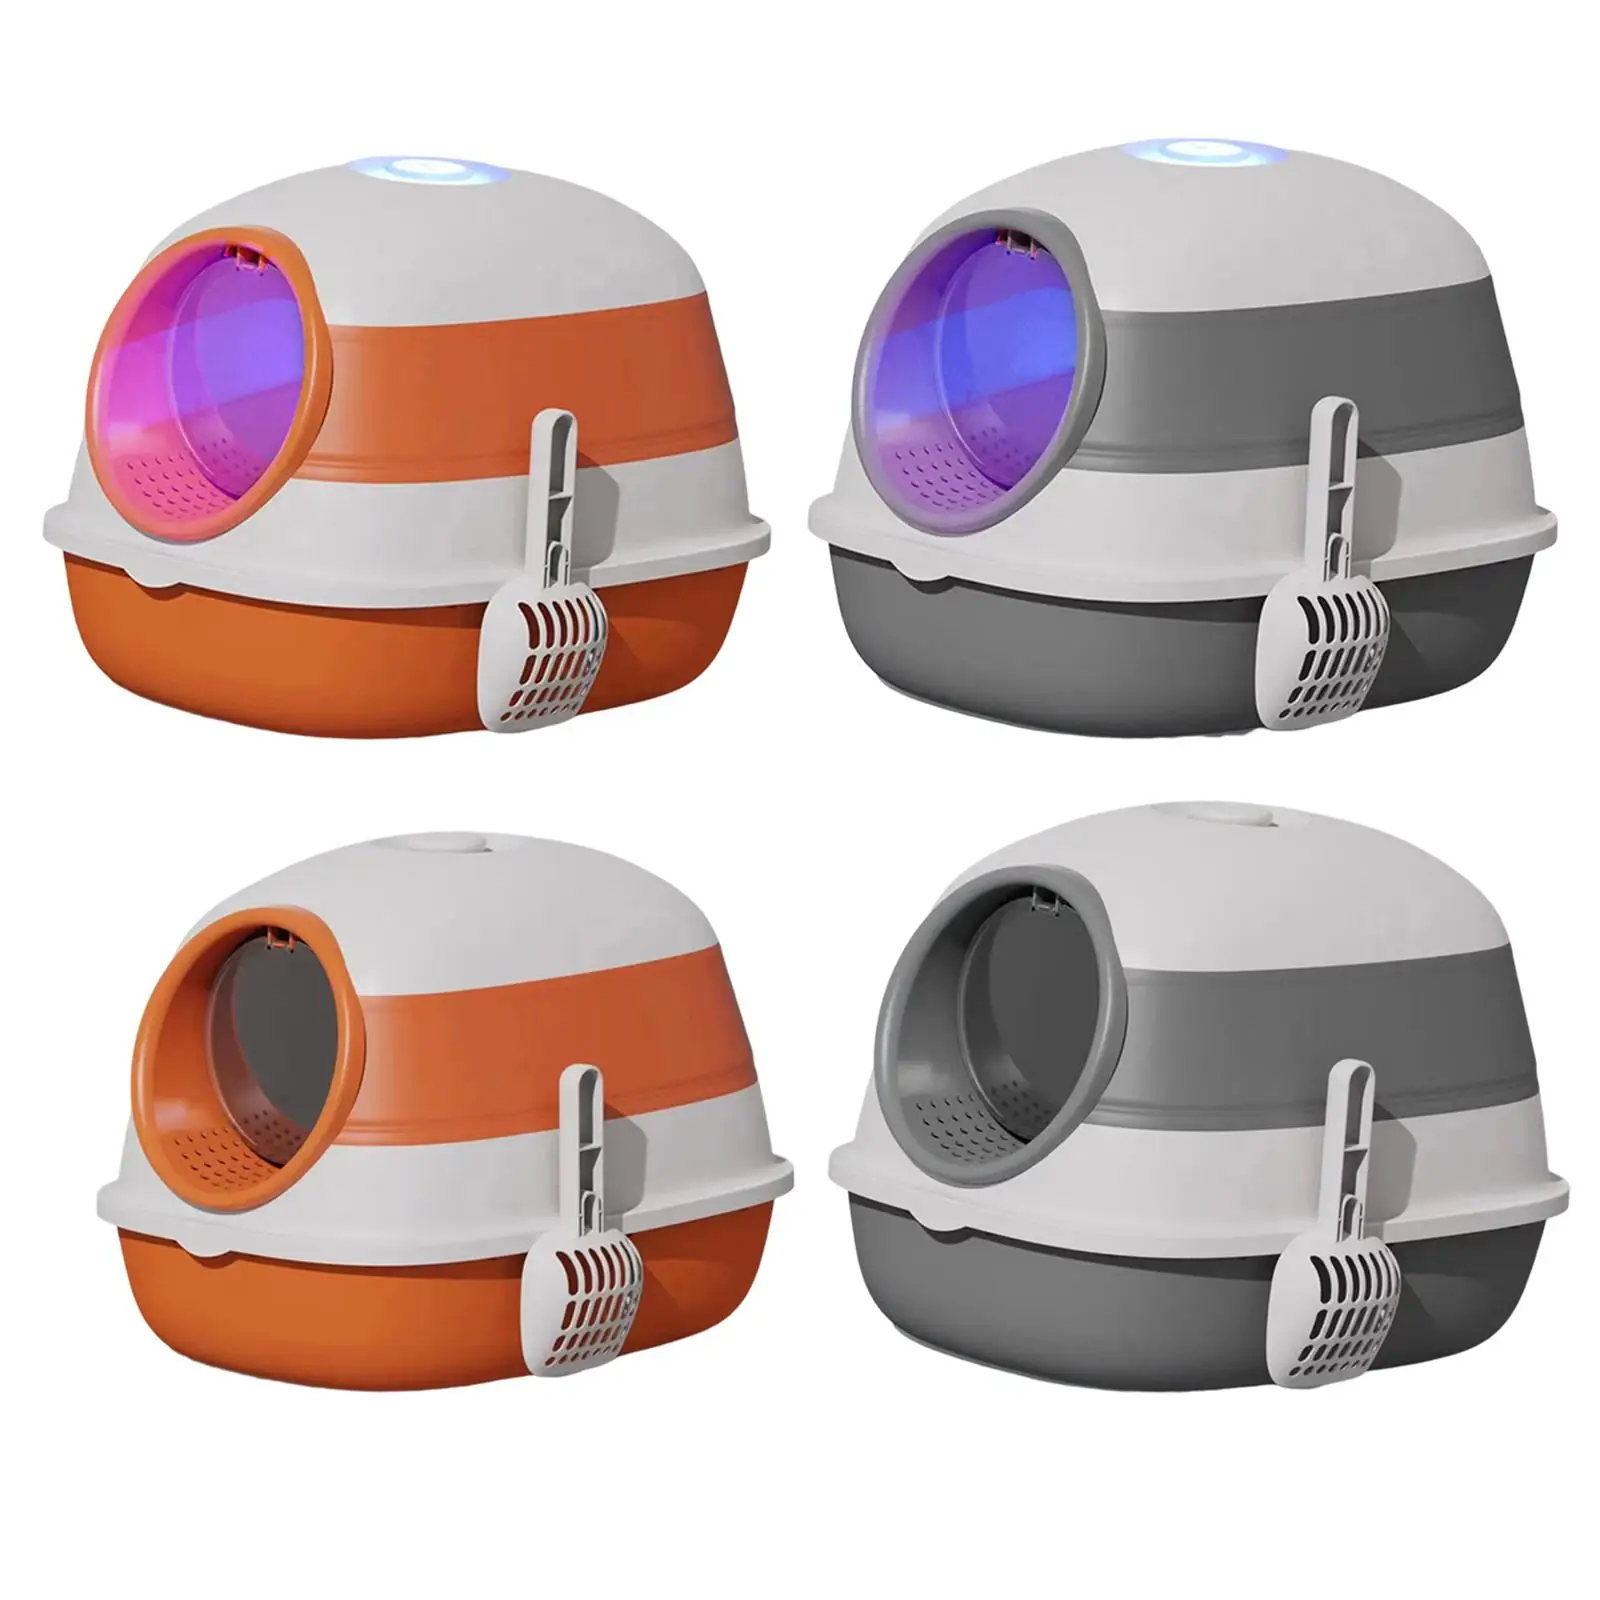 Folding Cat Litter Box Large Space Closed W/ Scoop Kitty Toilet Box Pet Kitten House Portable Easy Clean Sand Container Bedpan